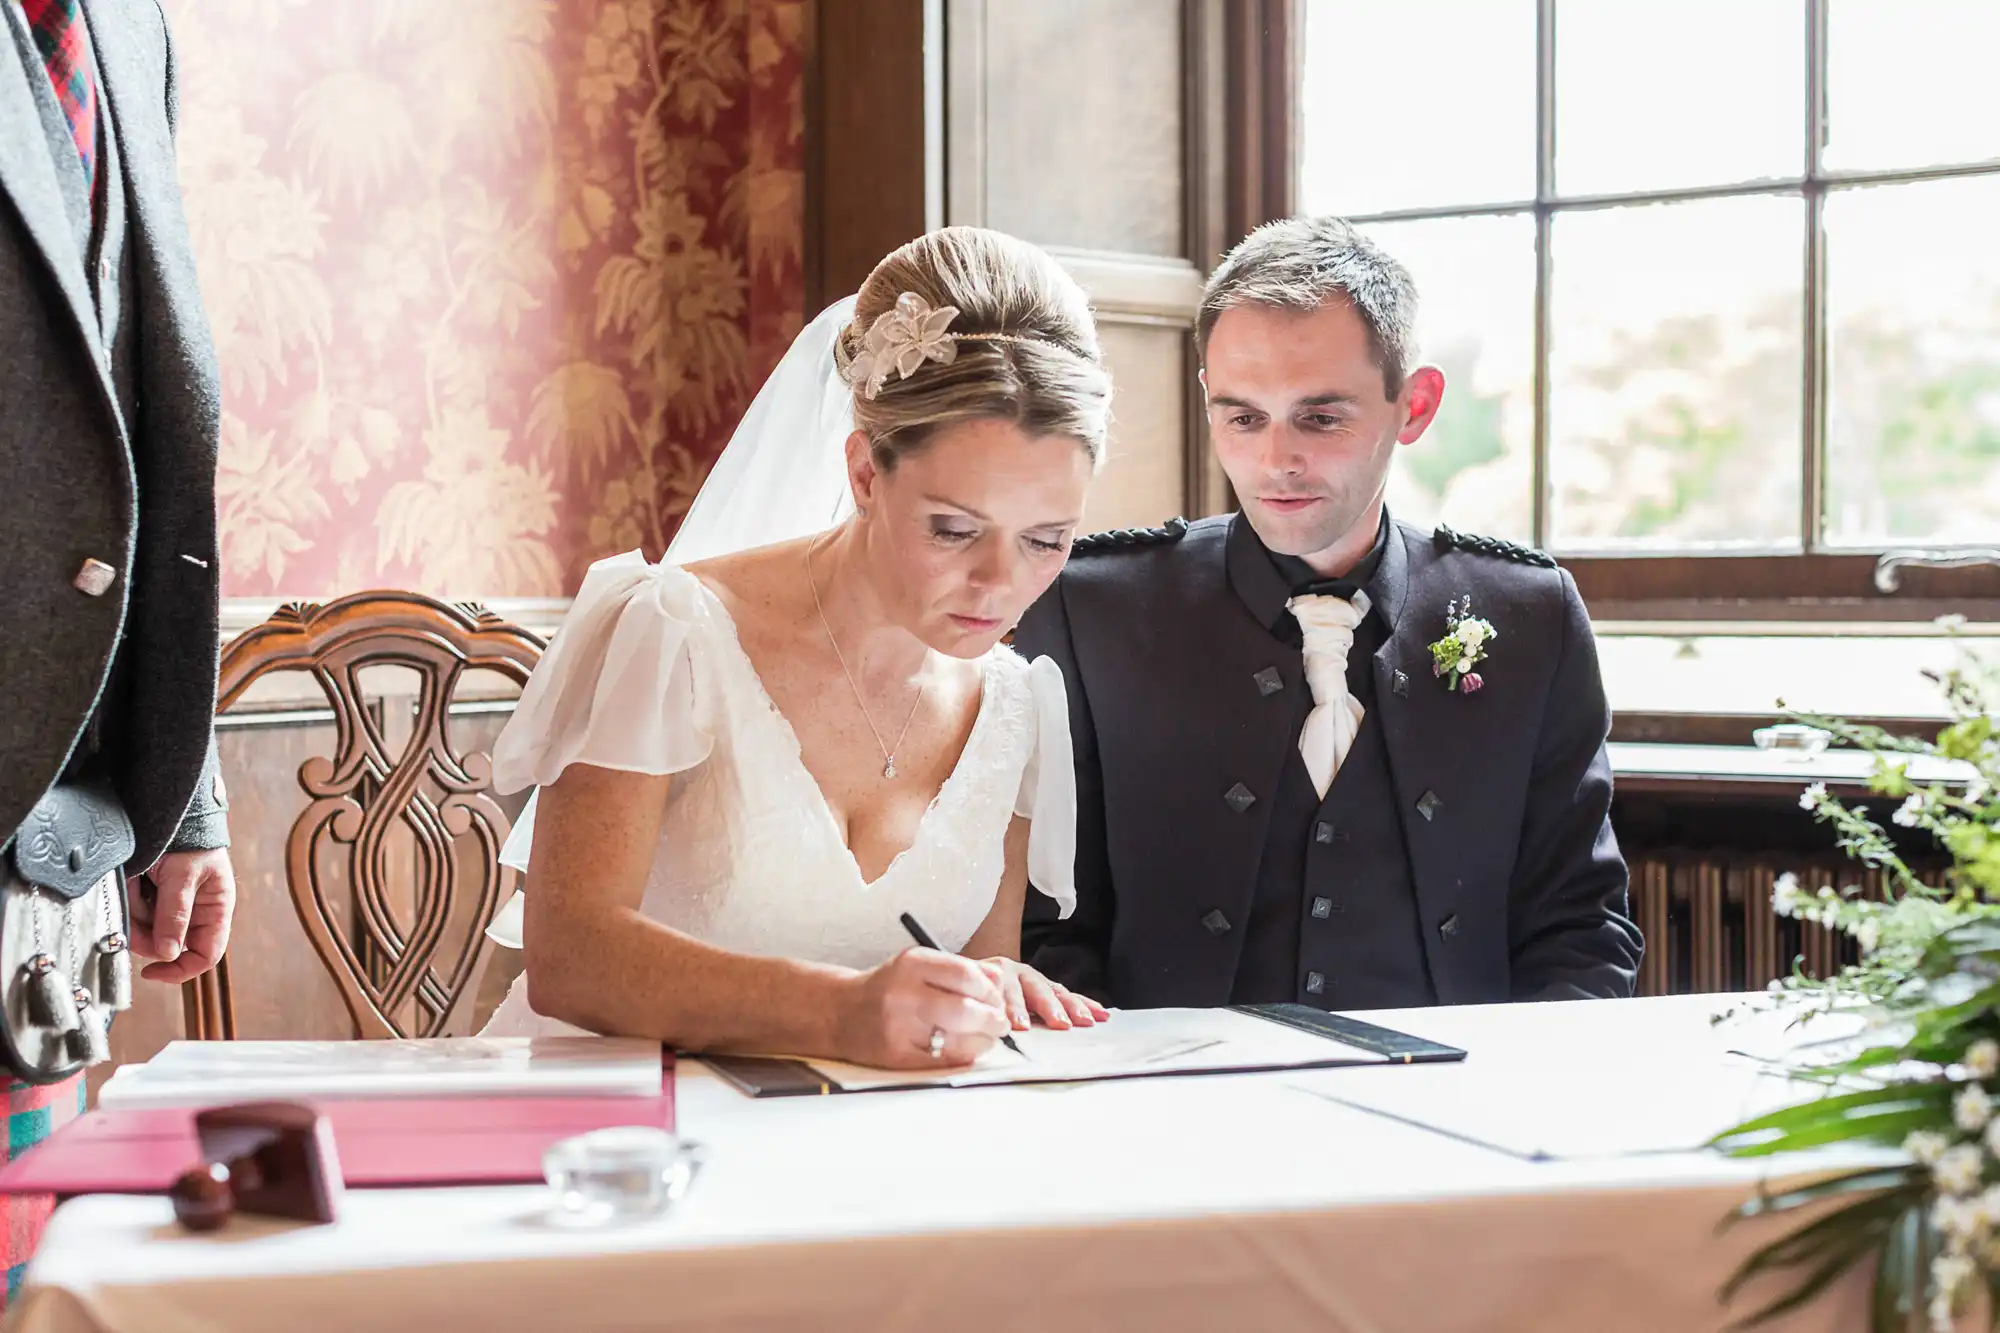 A bride in a white dress signing a document at a table, with the groom in a dark suit watching beside her, indoors by a window.